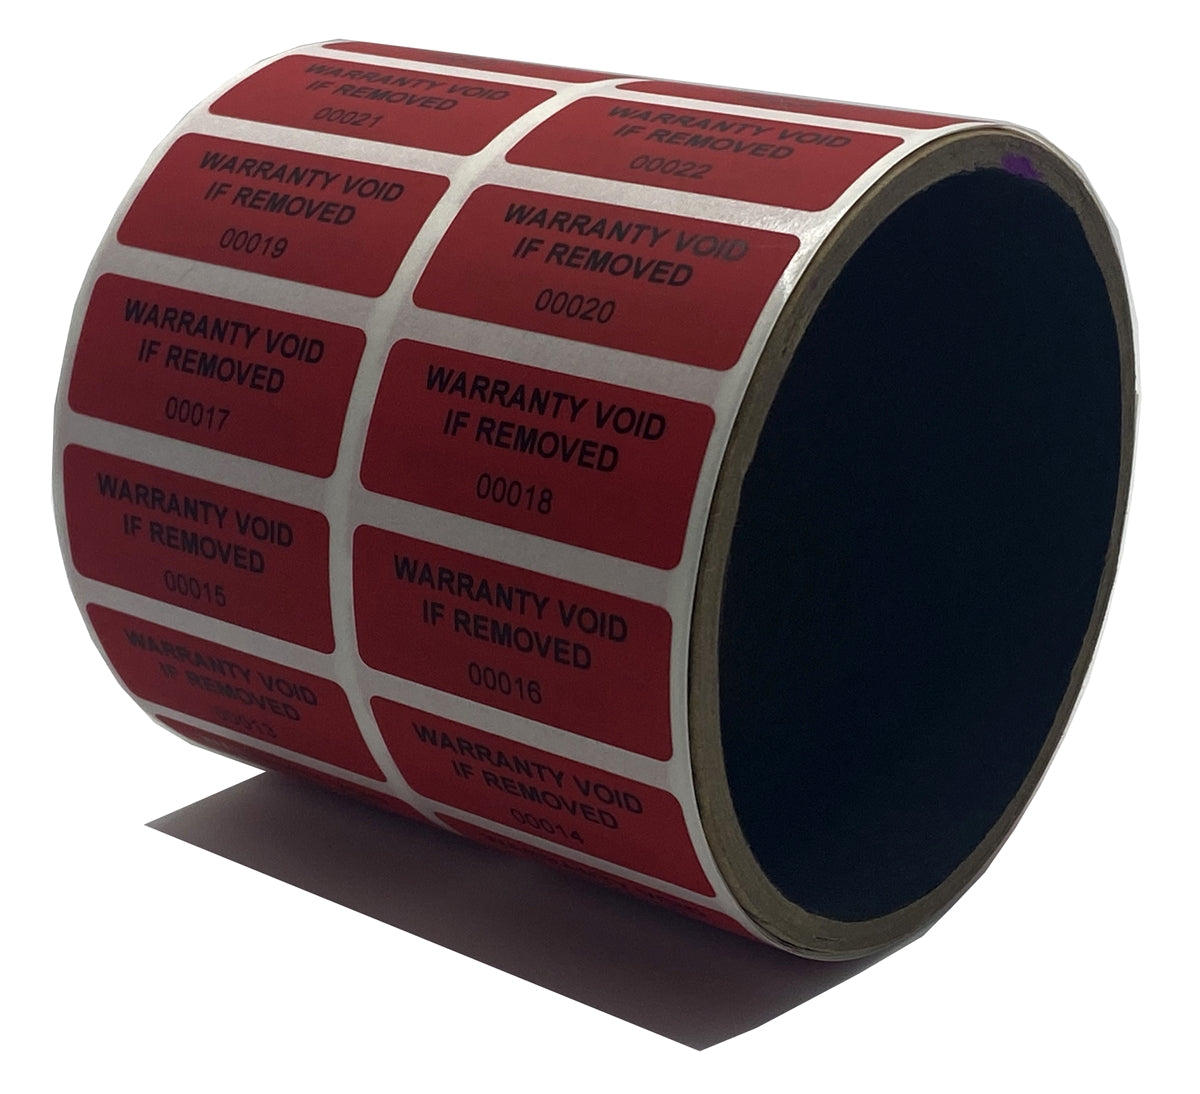 500 Tamper Evident Red Non Residue Security Labels TamperGuard® Seal Sticker, Rectangle 1.5" x 0.6" (38mm x 15mm). Printed: Warranty Void if Removed + Serialized